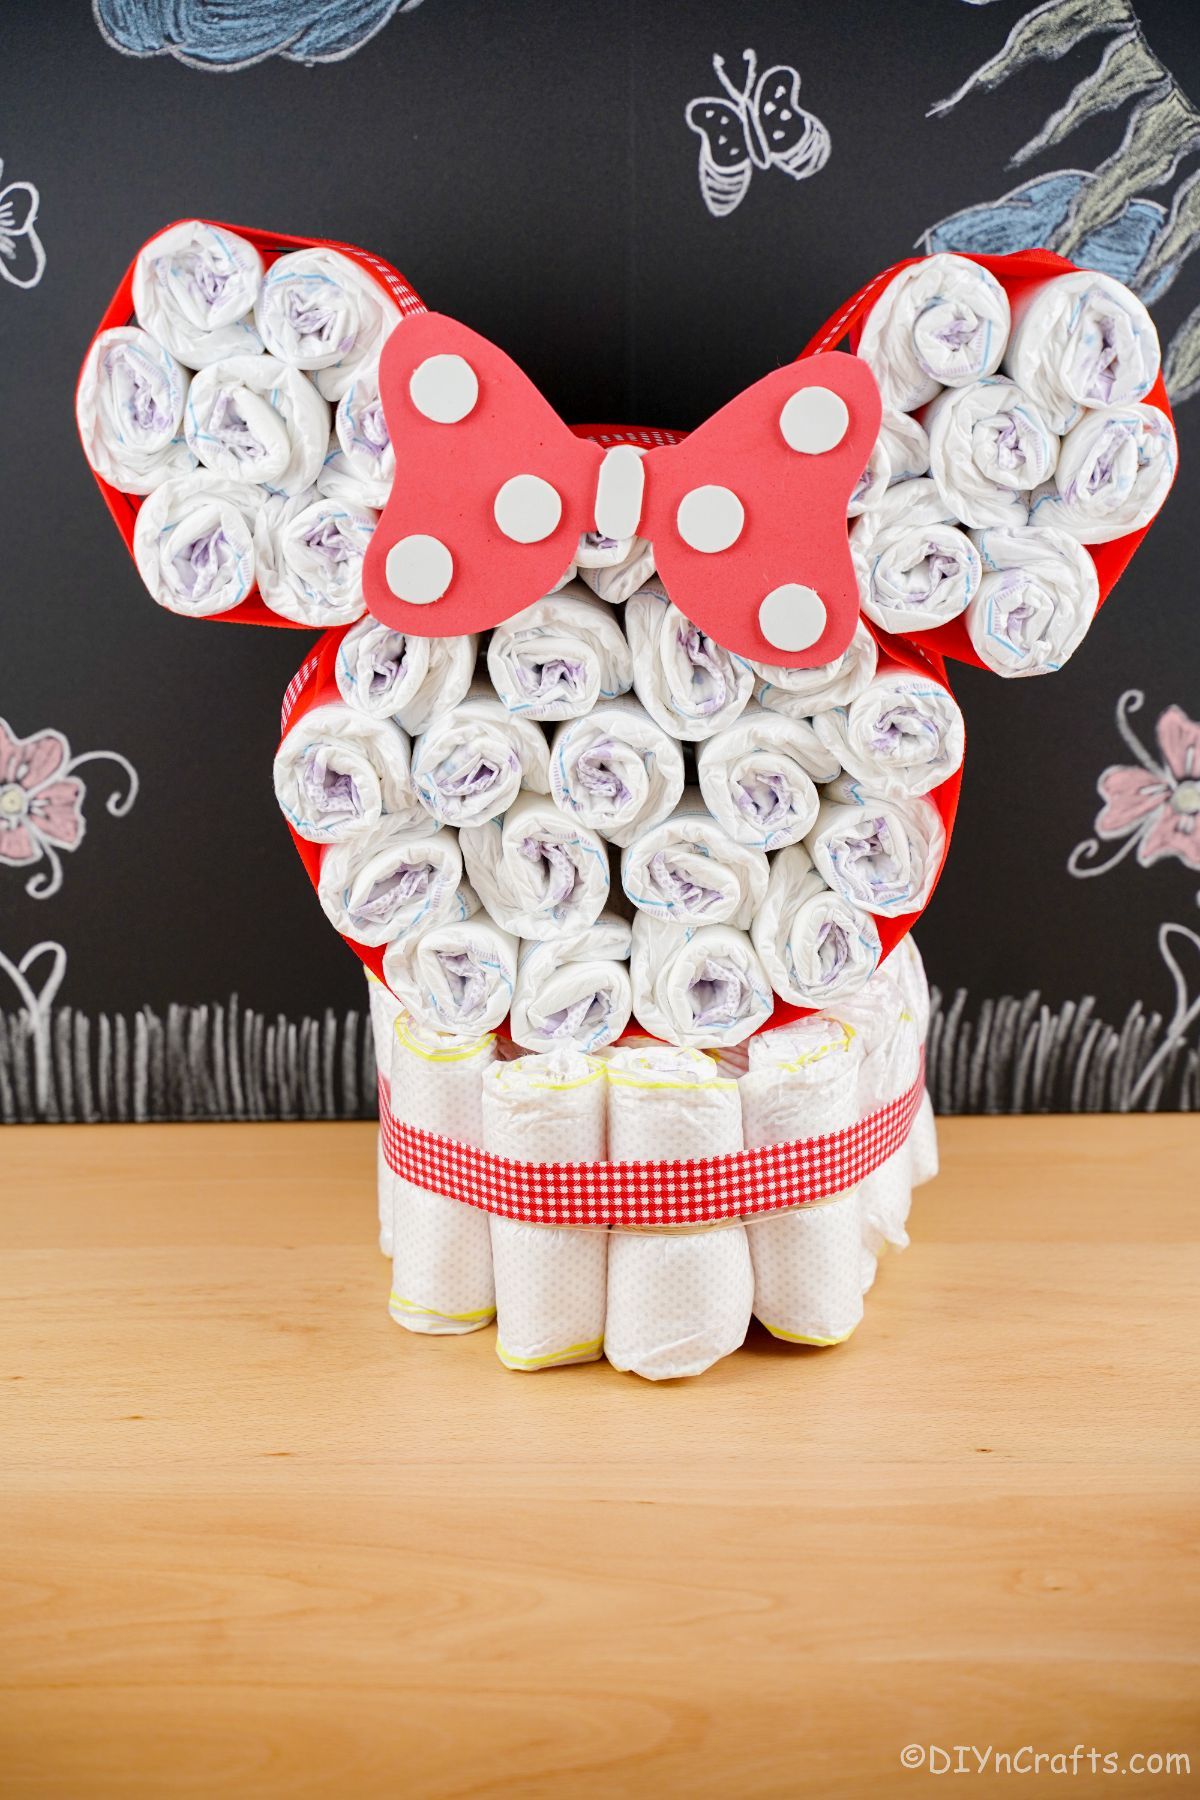 Disney Minnie Mouse head diaper cake on table with chalkboard background